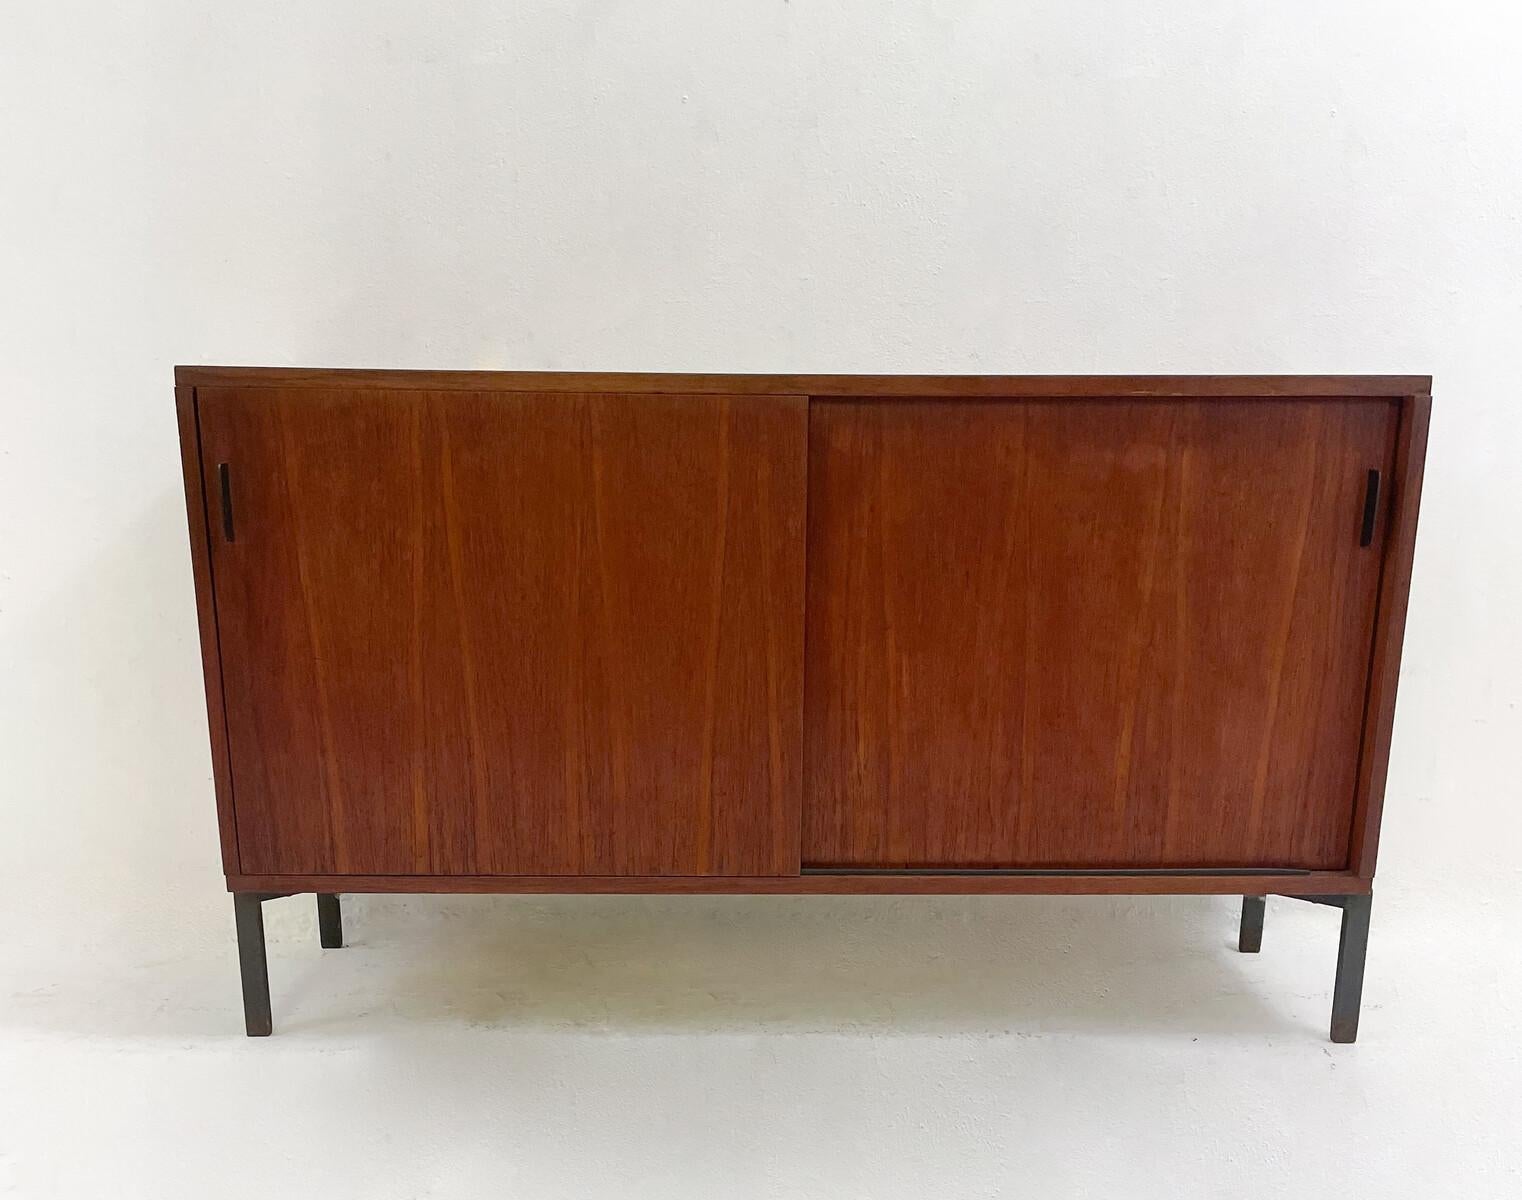 Mid-Century Modern Sideboard, Wood, Germany, 1960s - 2 Available For Sale 3